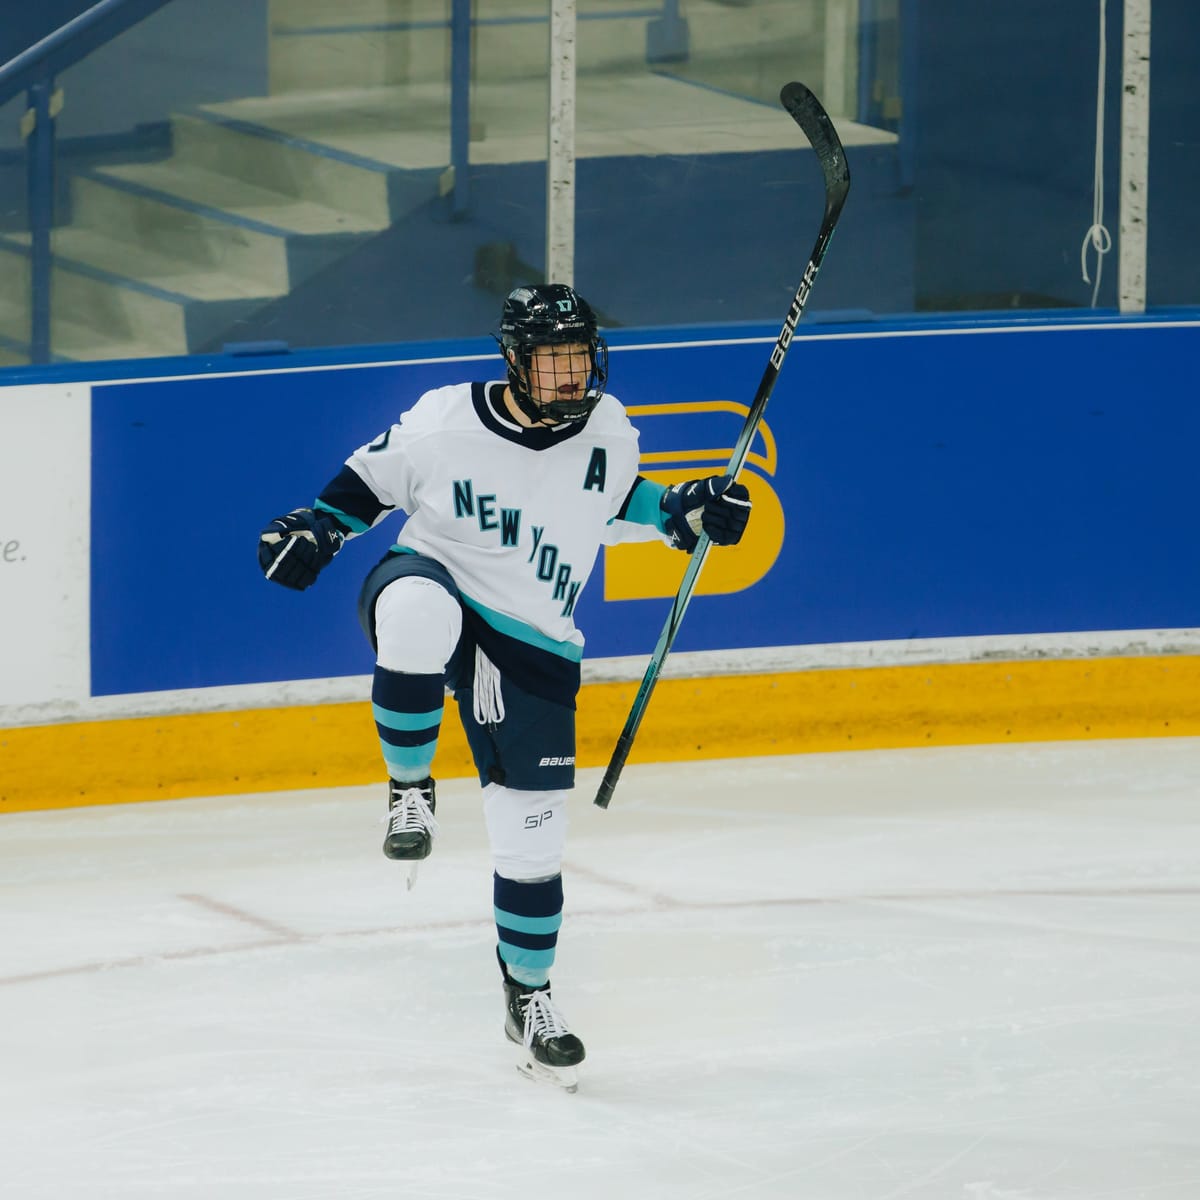 PWHL New York Earns First Franchise Win Against PWHL Toronto